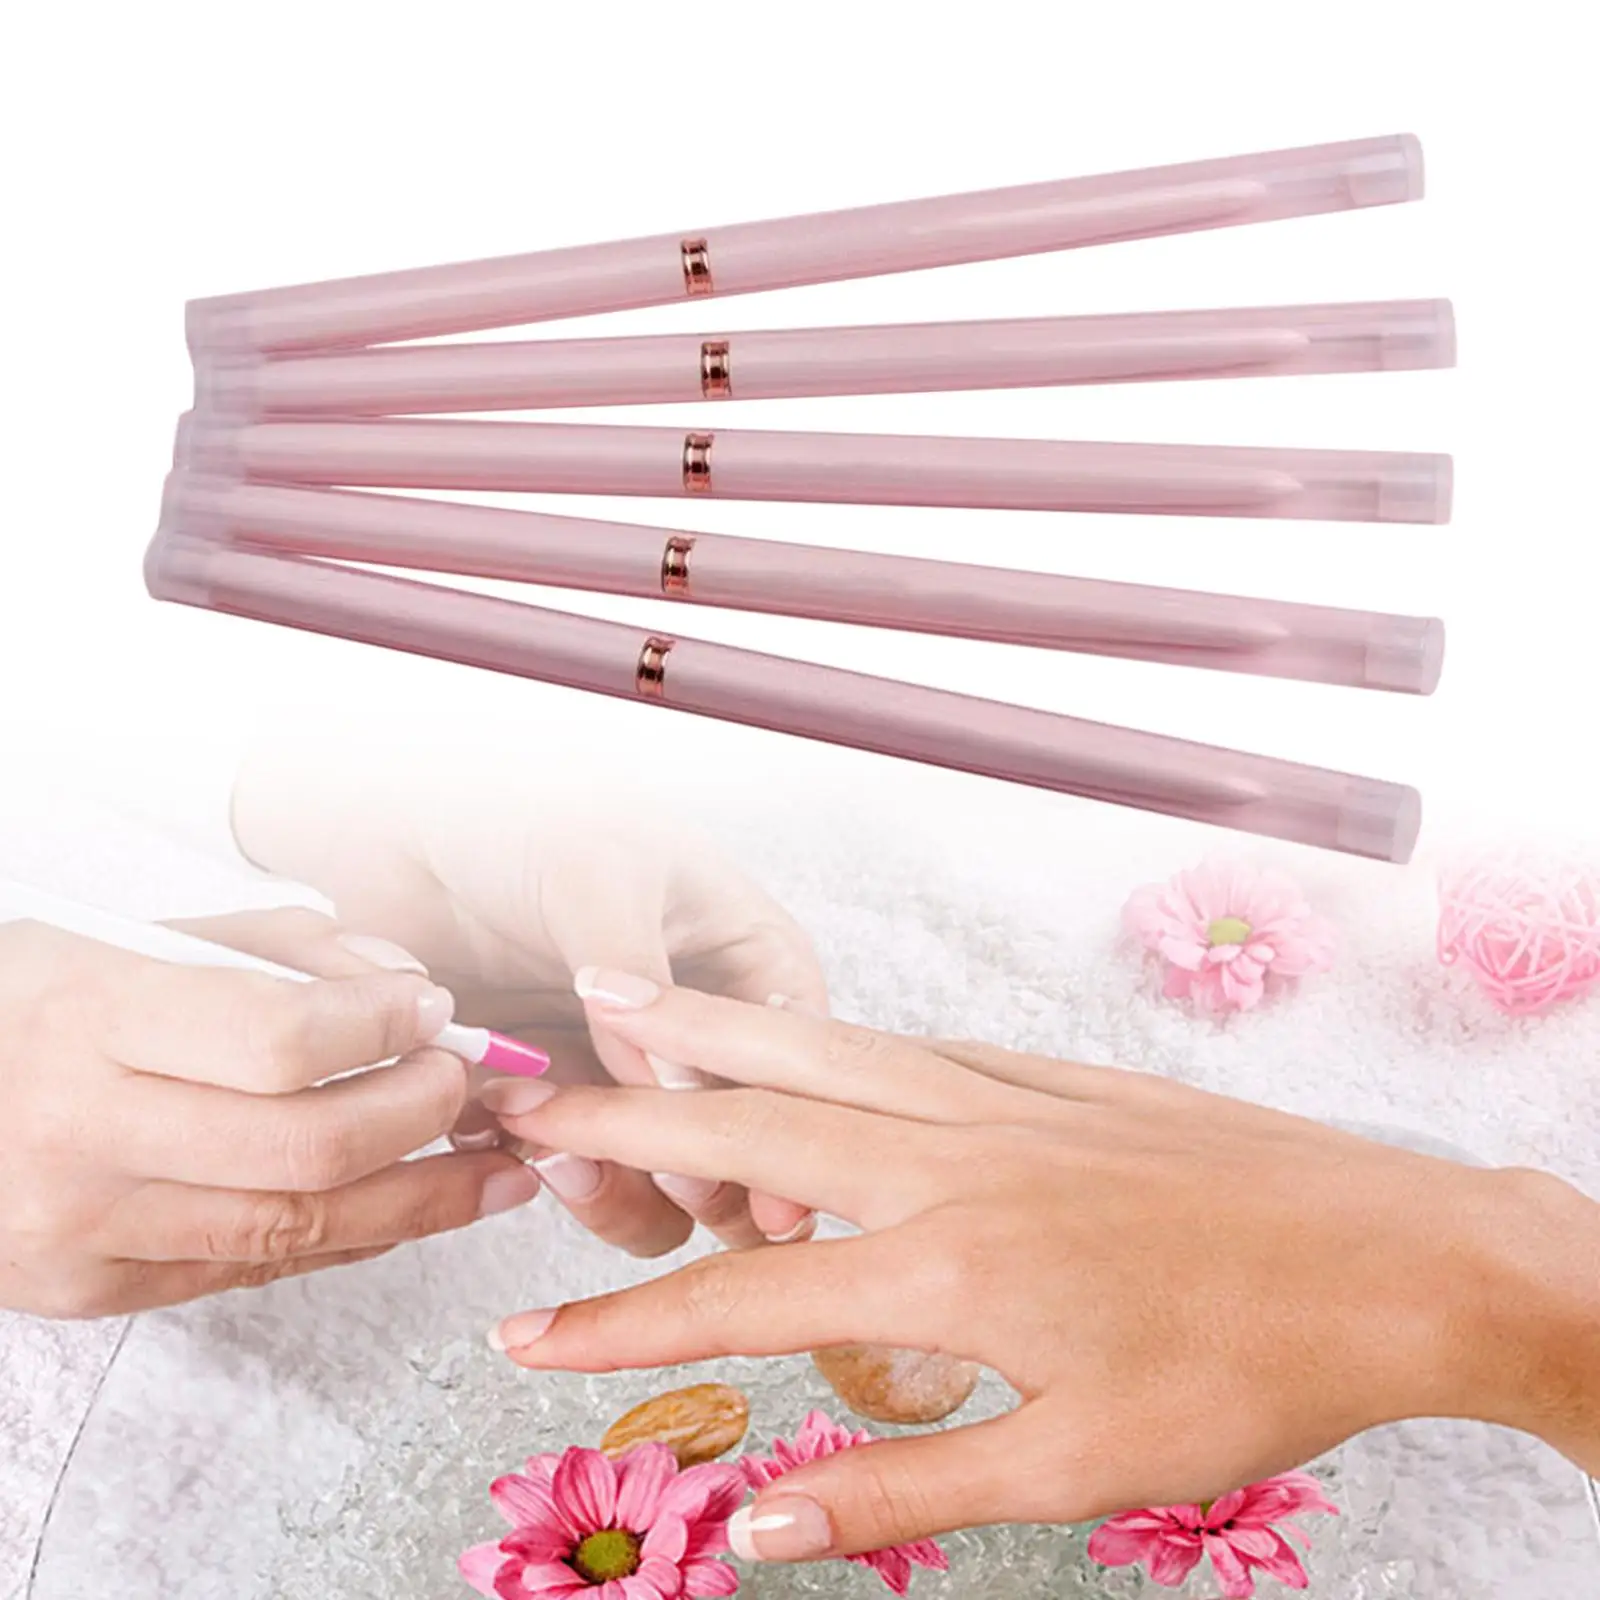 5Pcs Nail Art Brushes Set 4 mm-25mm Nail Drawing Pens for Elongated Lines DIY Professional Design Thin Details Delicate Coloring